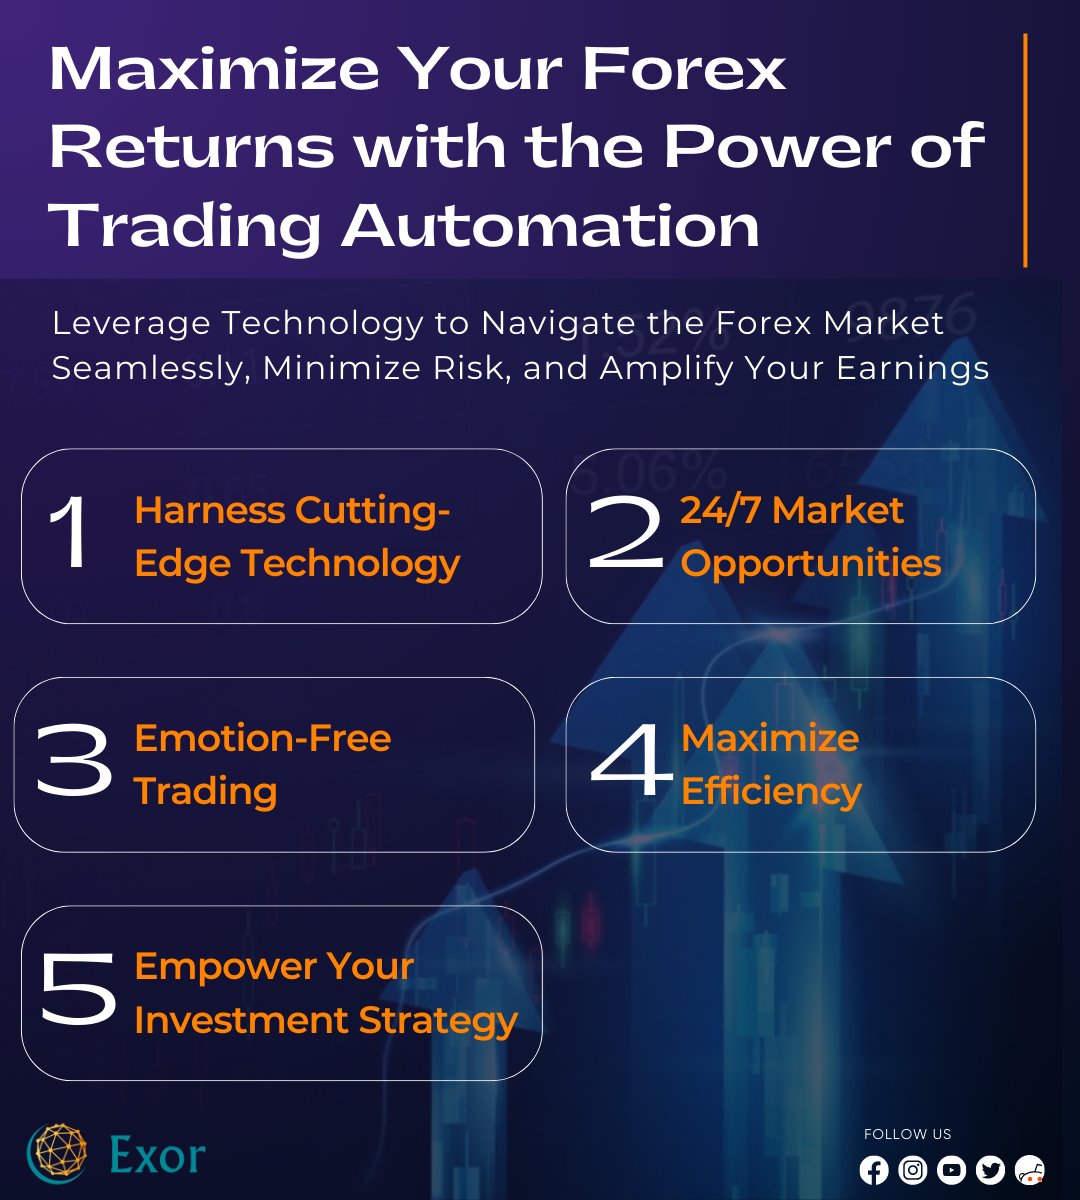 Unlock the potential of Forex trading with automated solutions. Harness the power of trading automation to optimize your strategies and maximize returns. Experience the future of Forex trading with Exor Company. 

#ForexTrading #TradingAutomation #ExorCompany